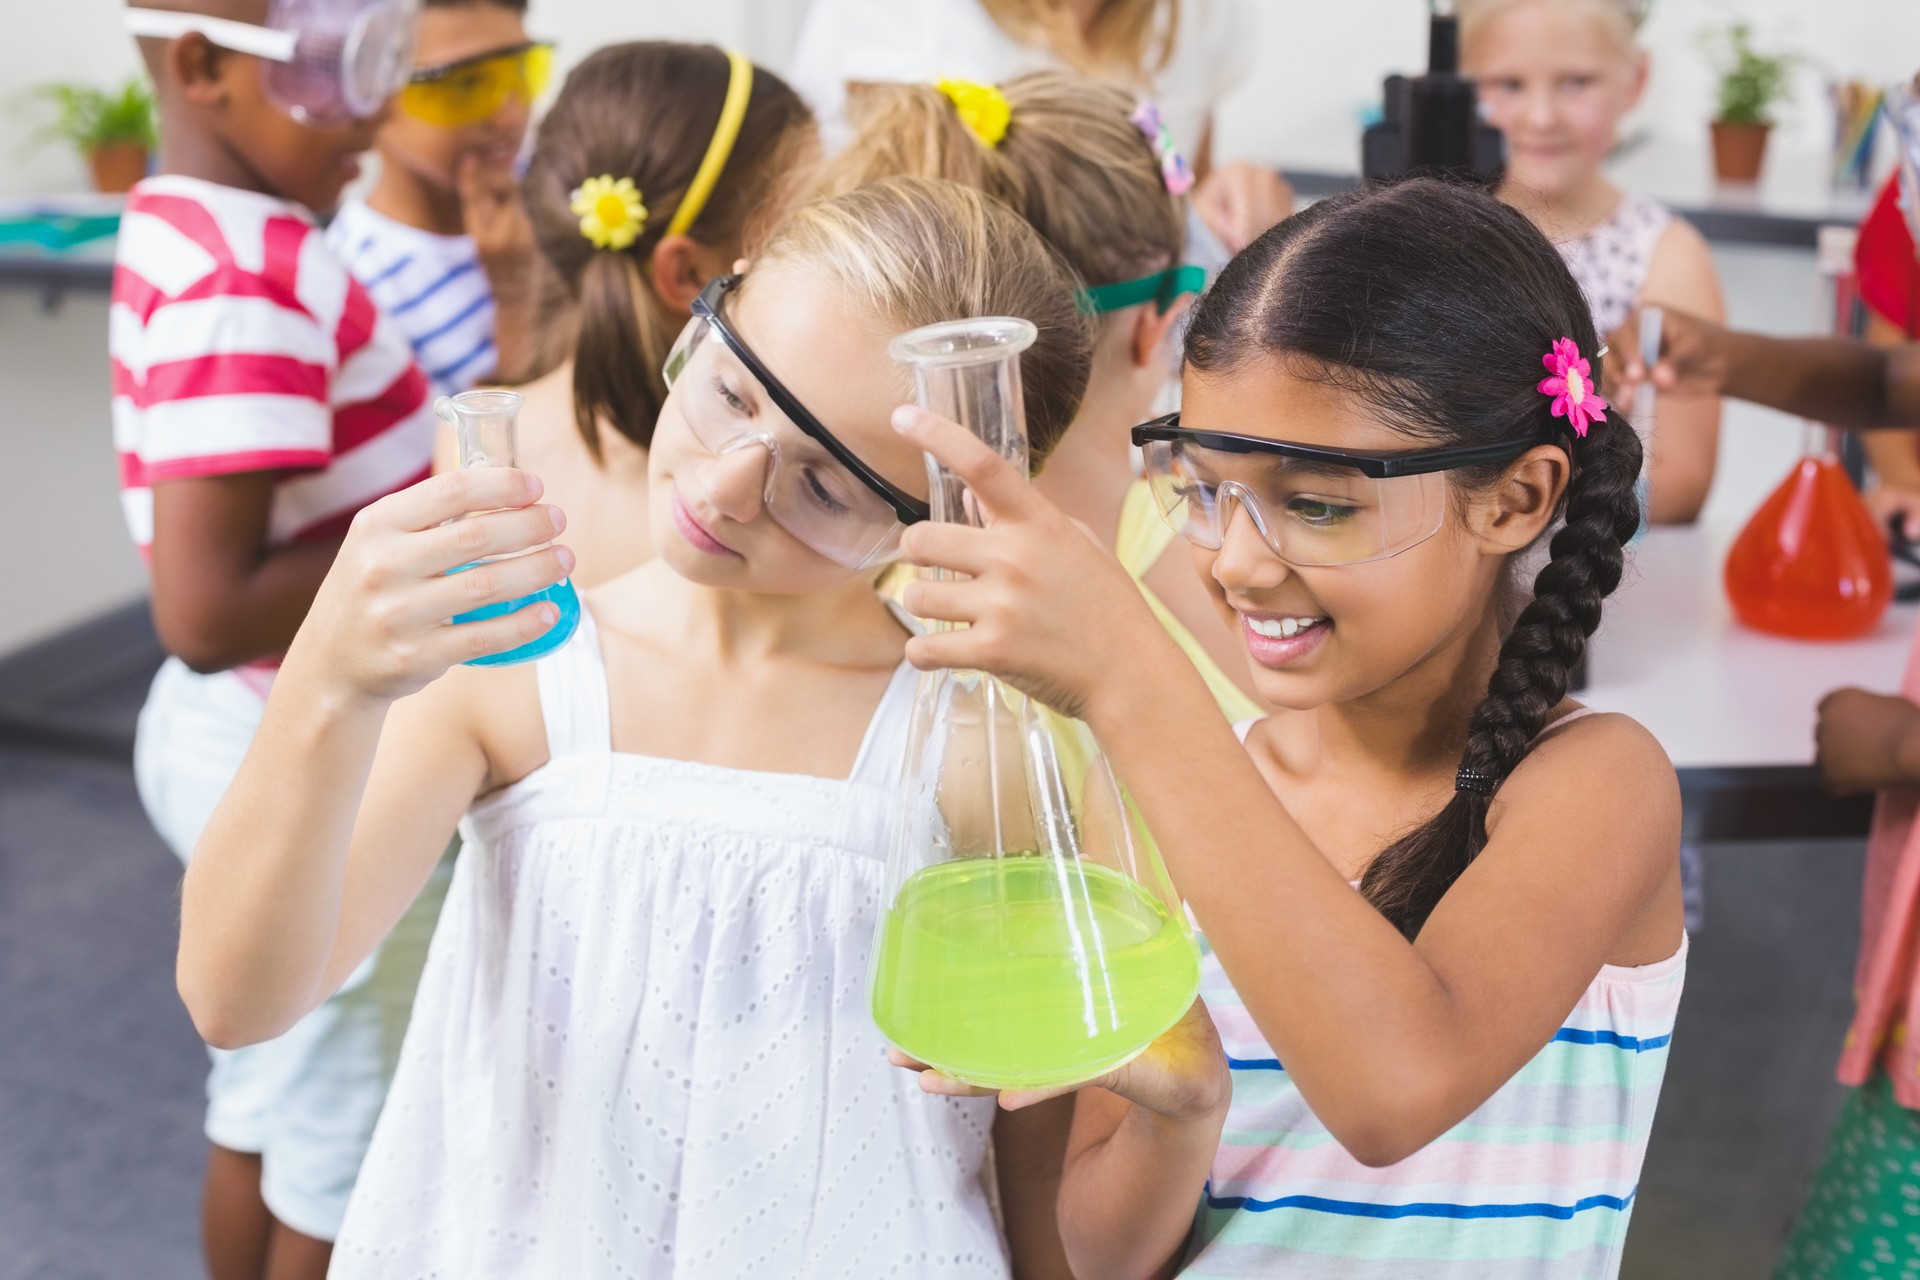 Kids doing a chemical experiment in laboratory